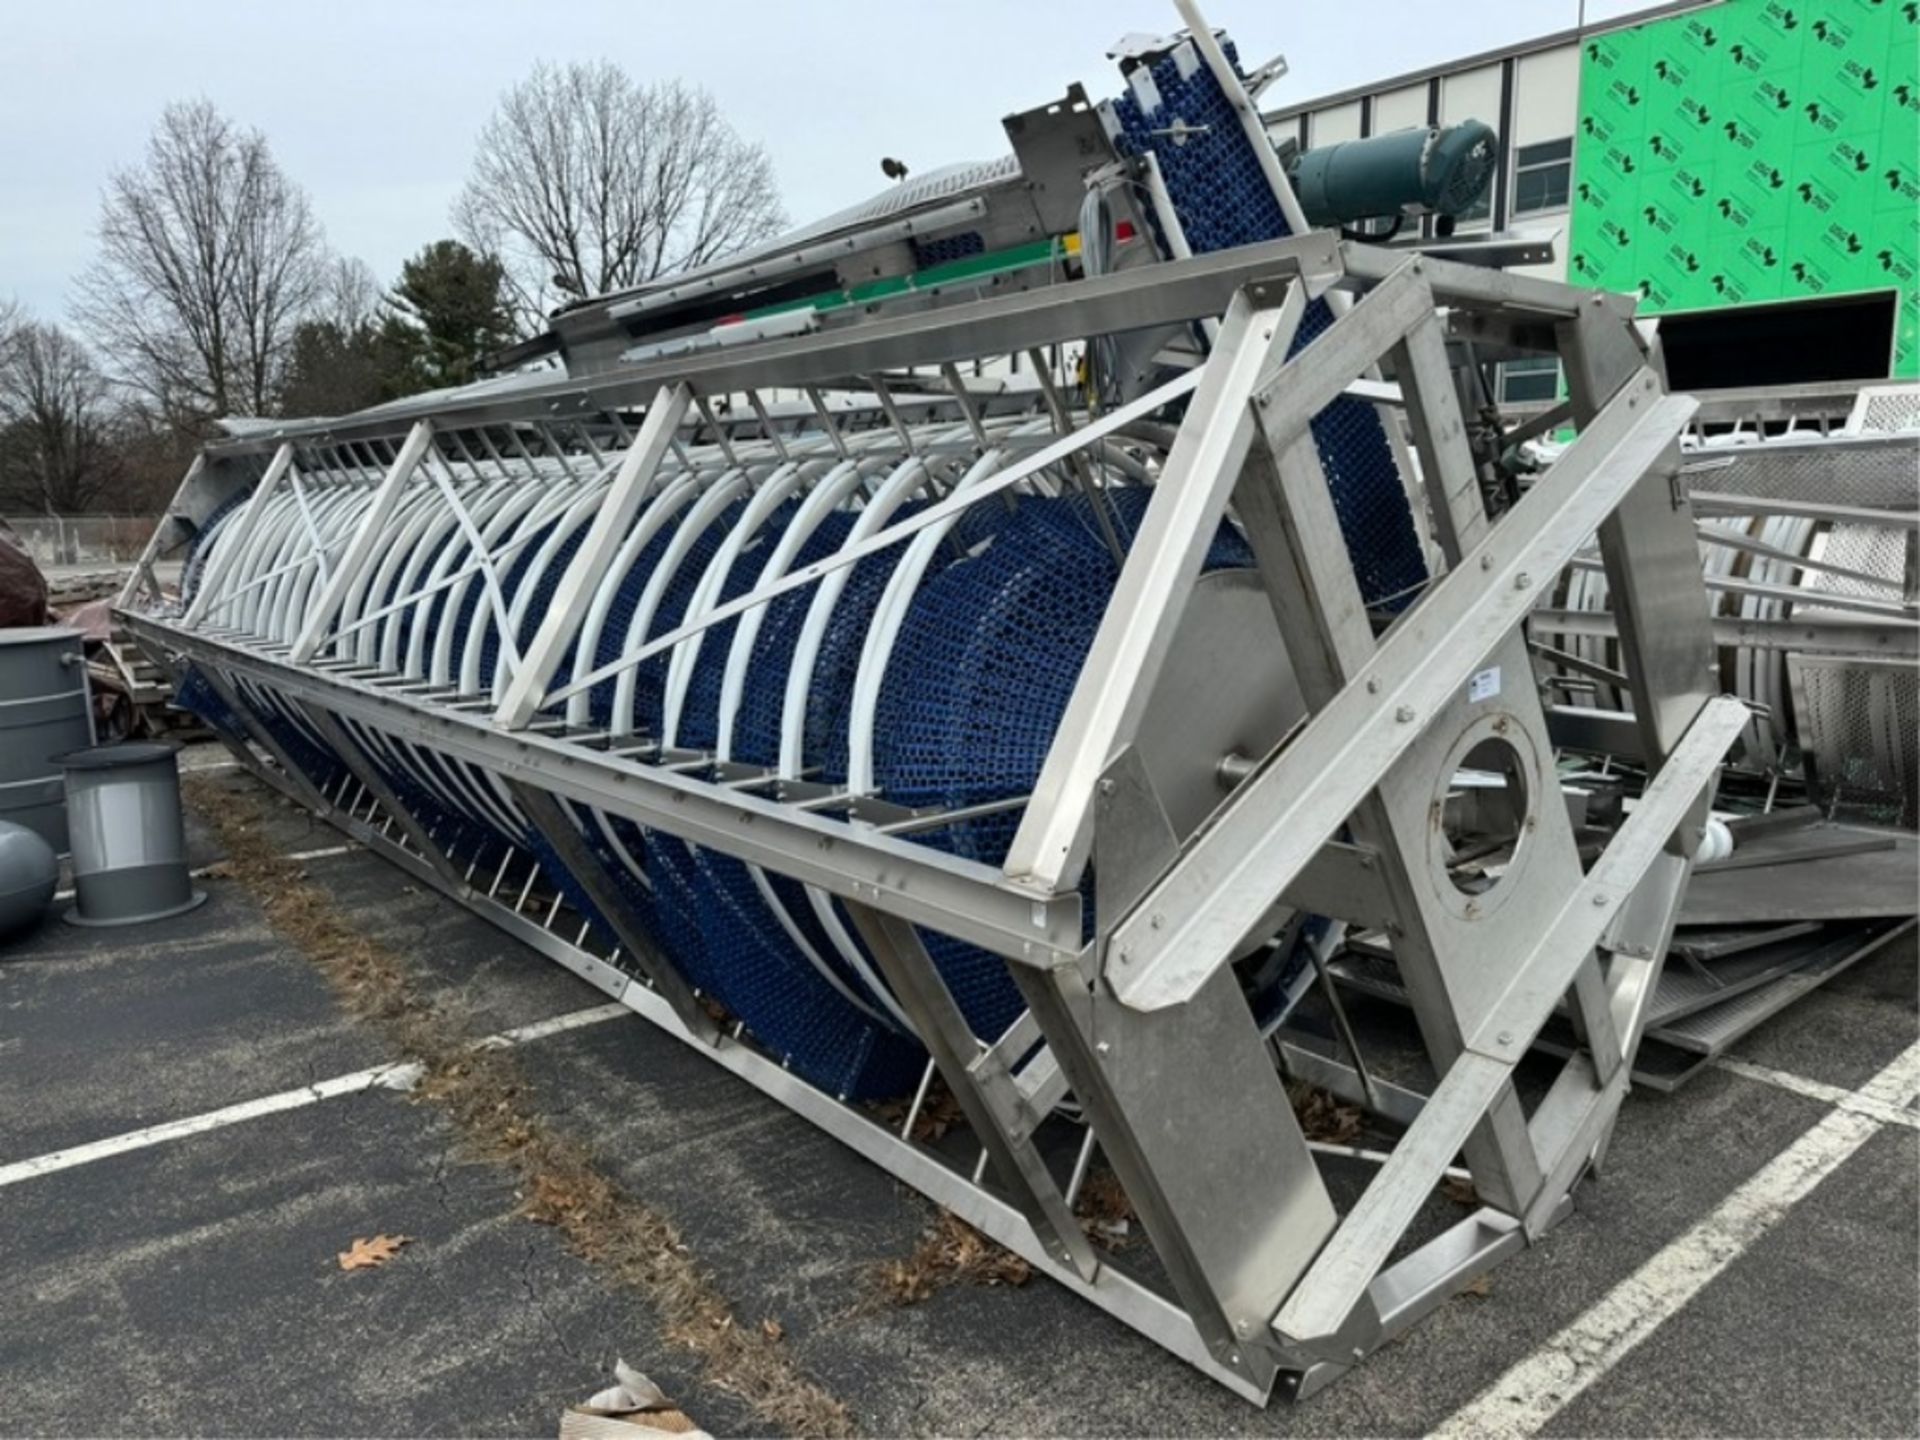 Spiral Conveyor System, Overall Height: Aprox. 27 ft. H x 16" W Conveyor Chain, with Top Mounted